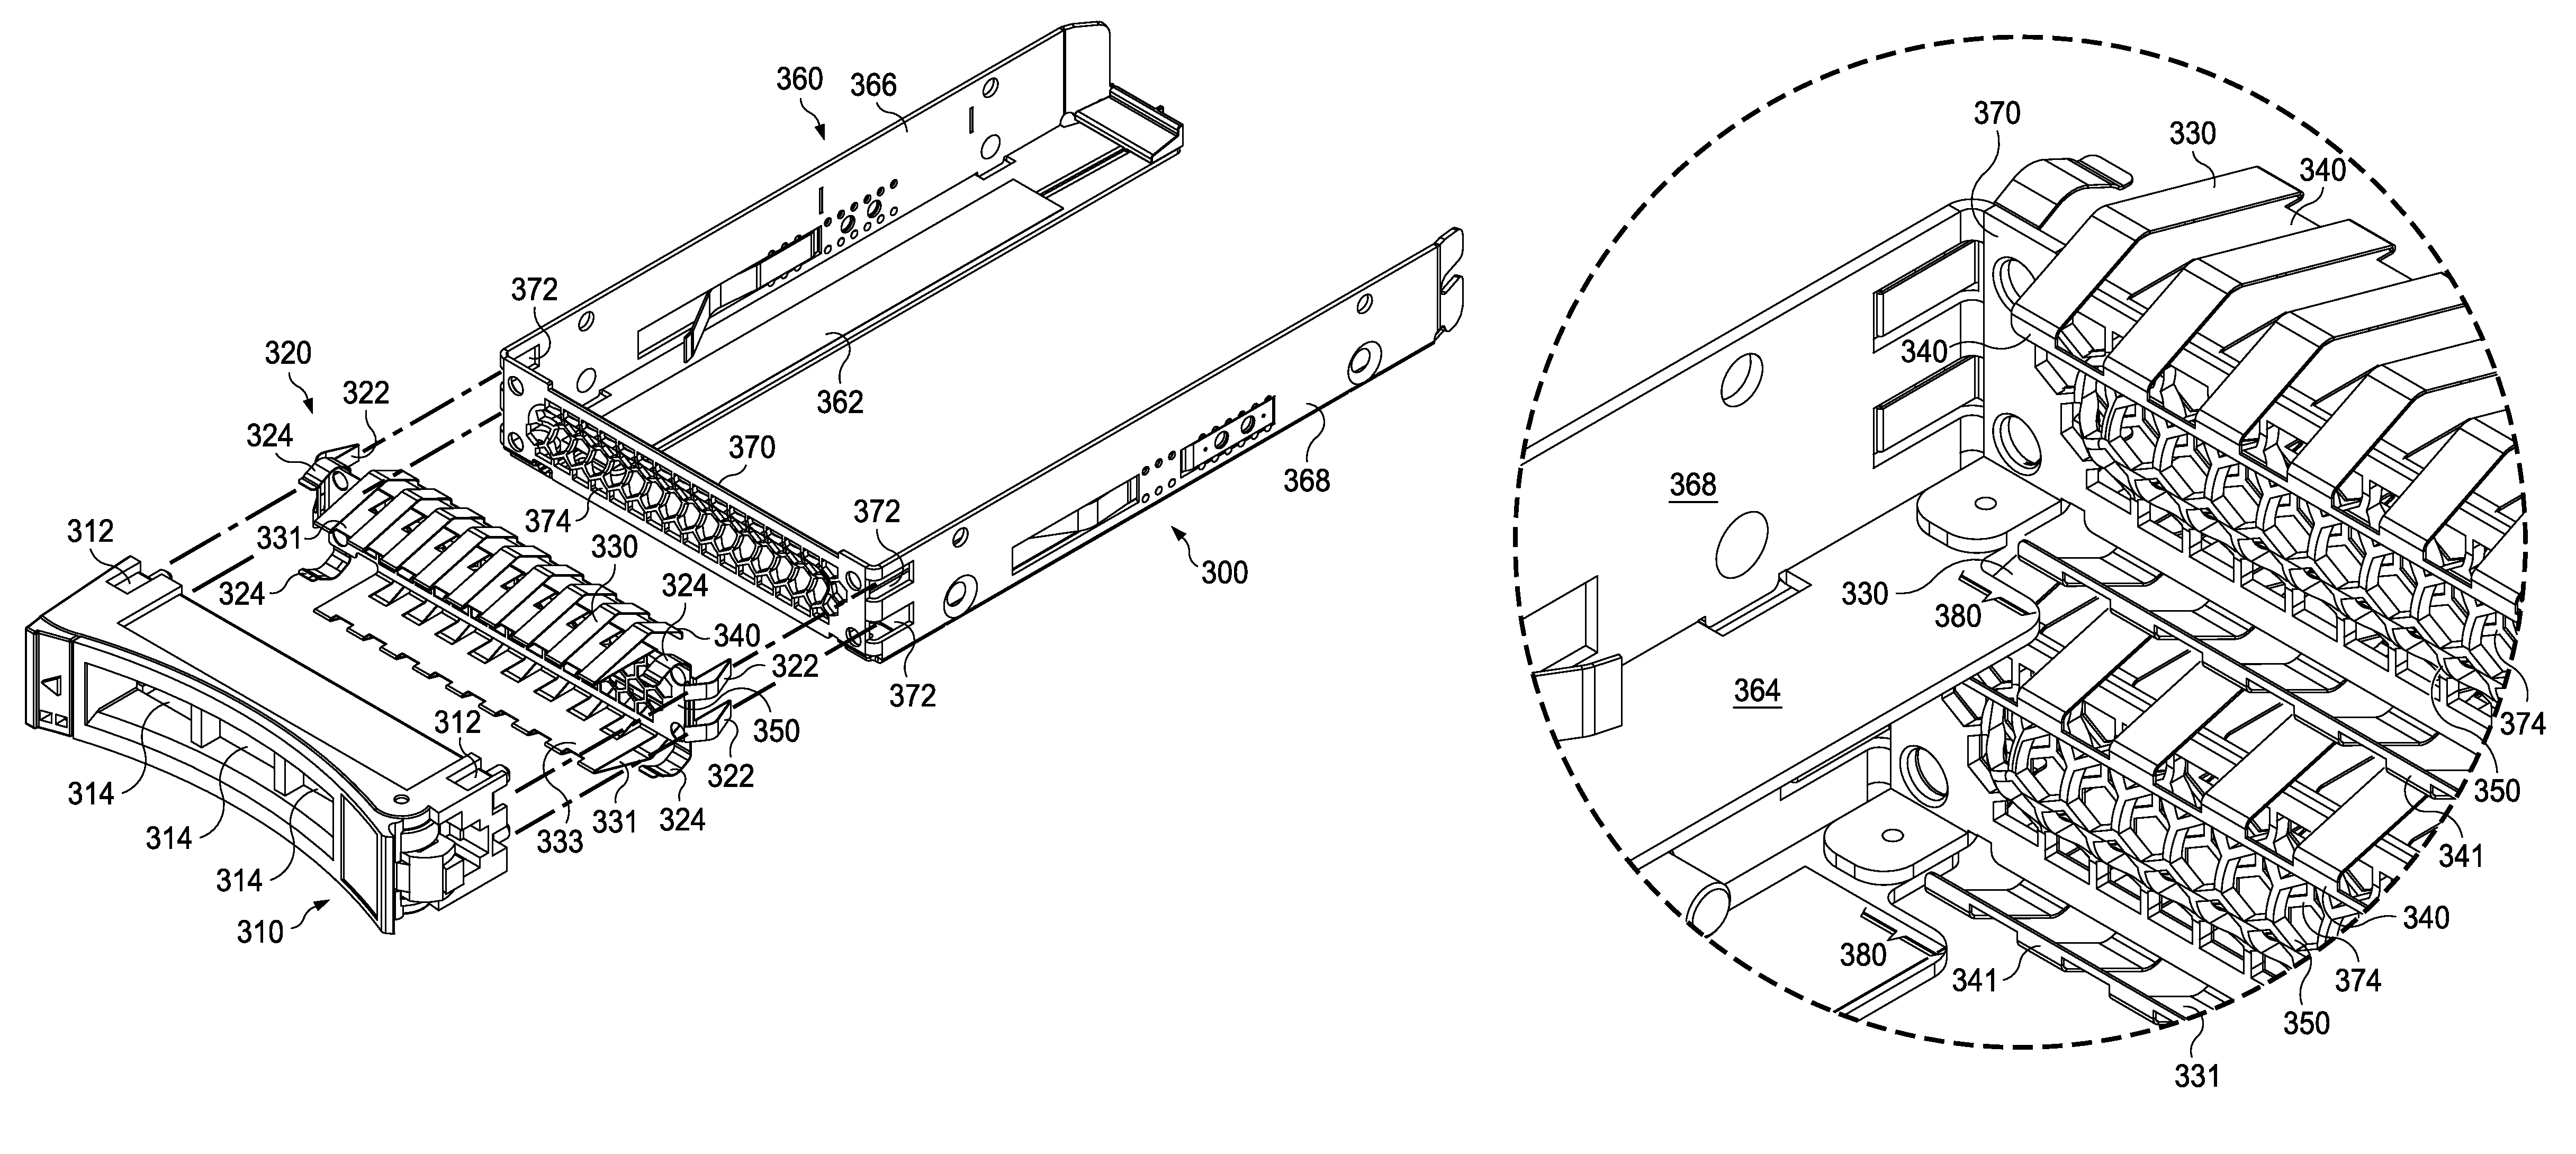 Compact HDD carrier mechanism featuring self actuating EMC springs to prevent HDD component shorting